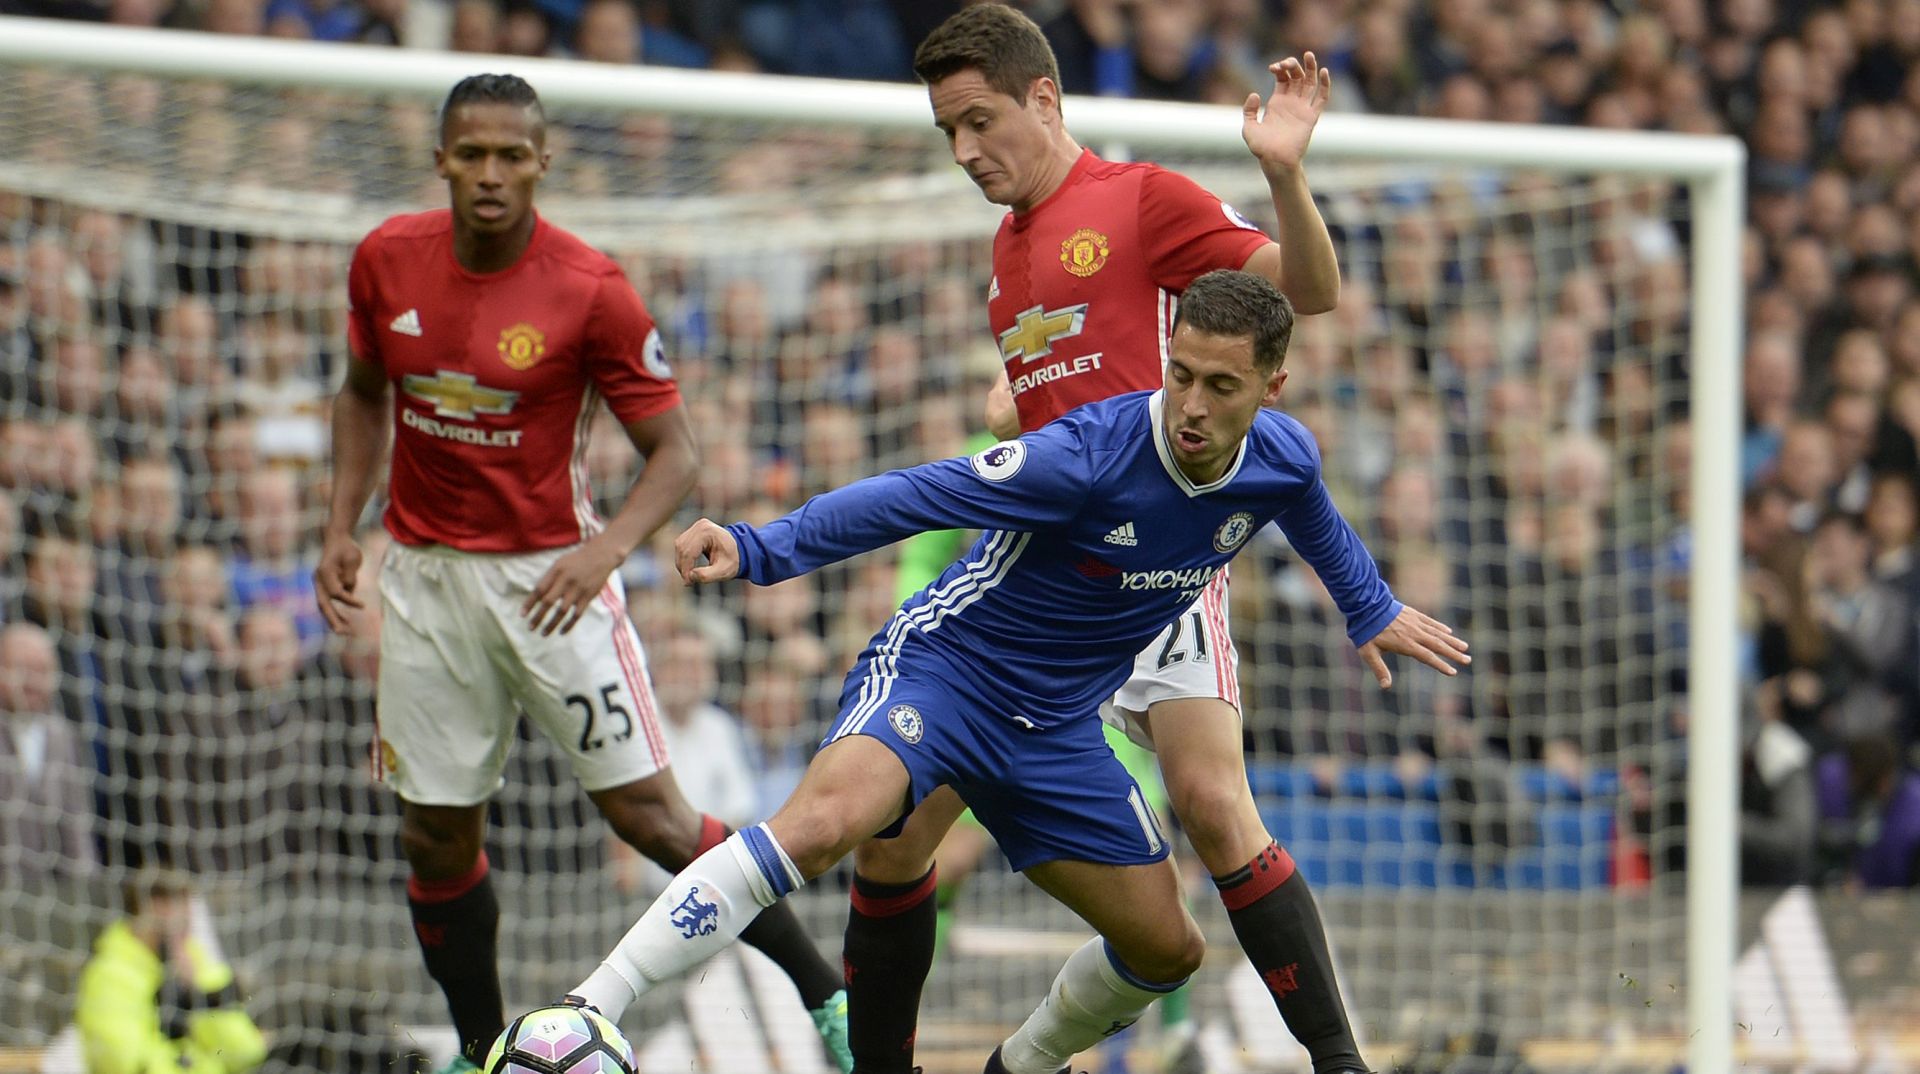 epa05599716 Chelsea's Eden Hazard (front) vies for the ball with Manchester United's Ander Herrera (rear) during the English Premier League match between Chelsea FC and Manchester United at Stamford Bridge in London, Britain, 23 October 2016.  EPA/WILL OLIVER EDITORIAL USE ONLY. No use with unauthorized audio, video, data, fixture lists, club/league logos or 'live' services. Online in-match use limited to 75 images, no video emulation. No use in betting, games or single club/league/player publications